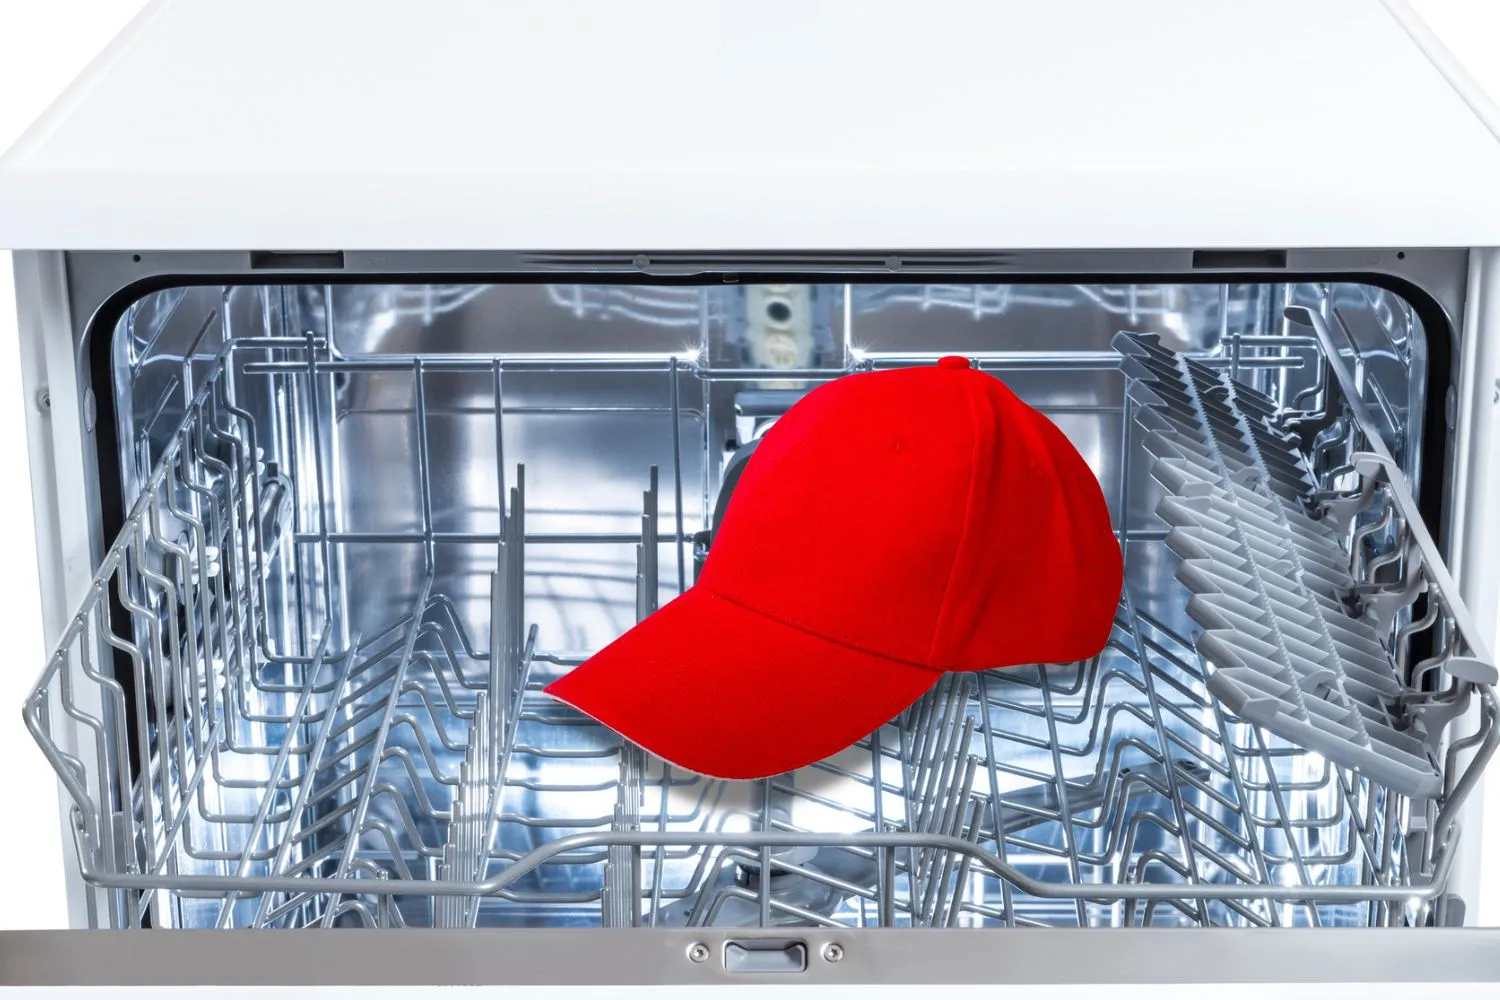 How to Wash a Hat in the Dishwasher (safely)